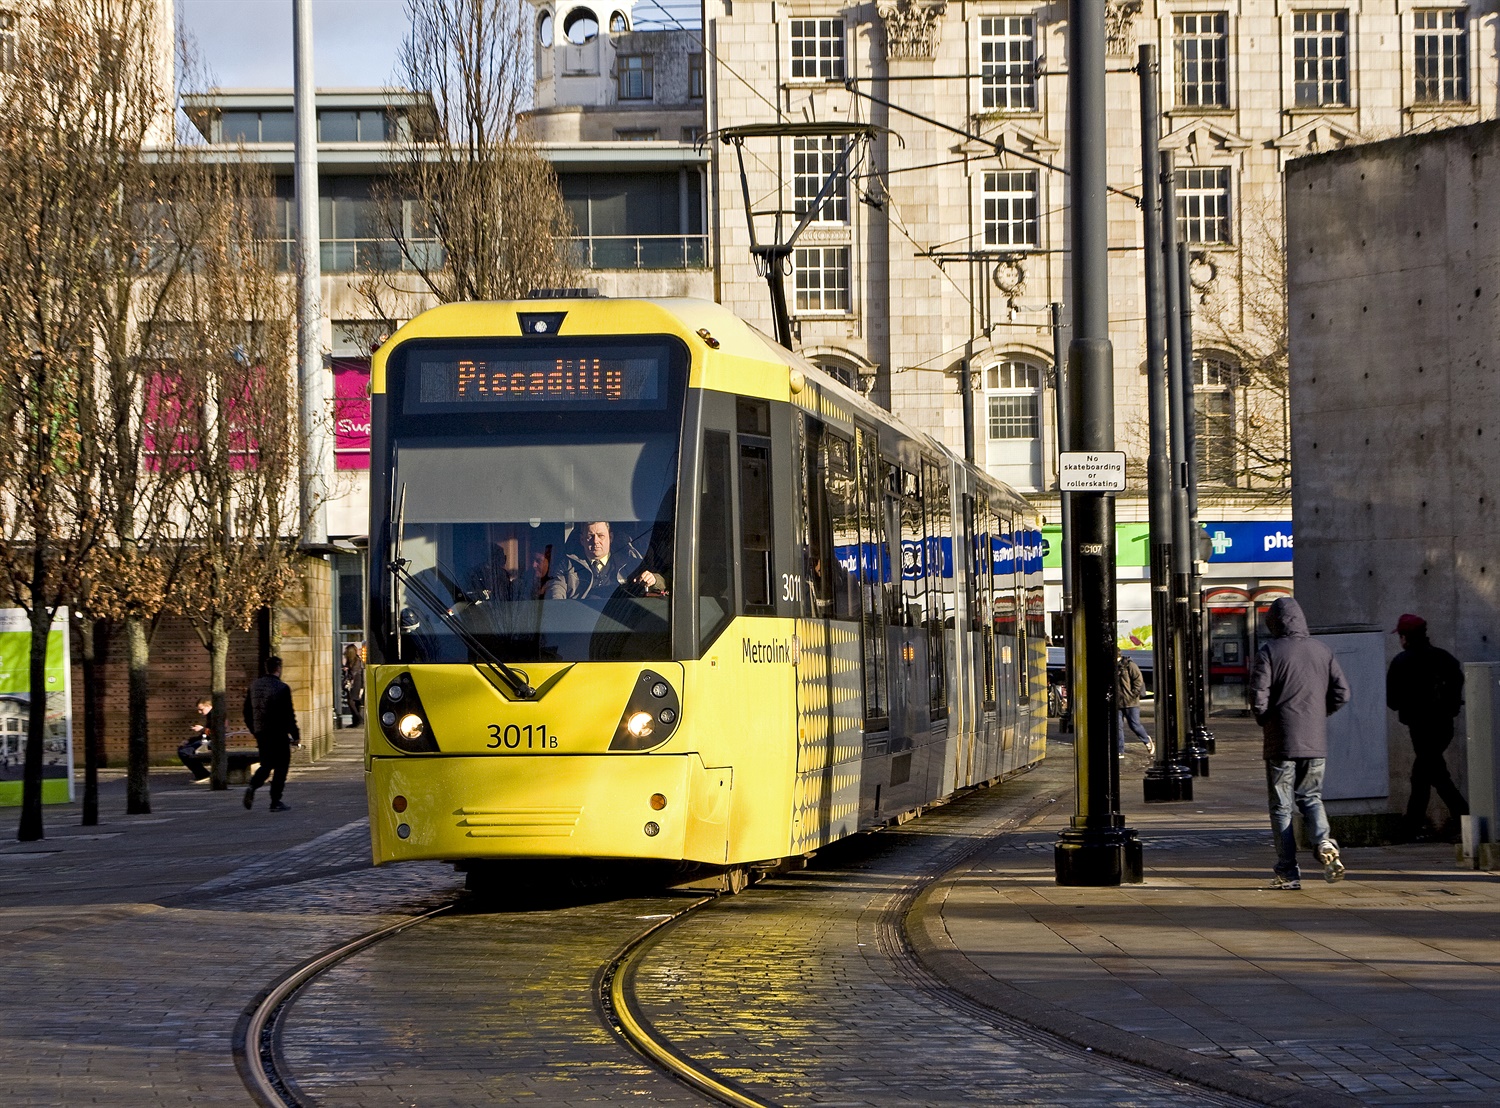 Manchester accident shows dangers of trams in pedestrian areas – RAIB